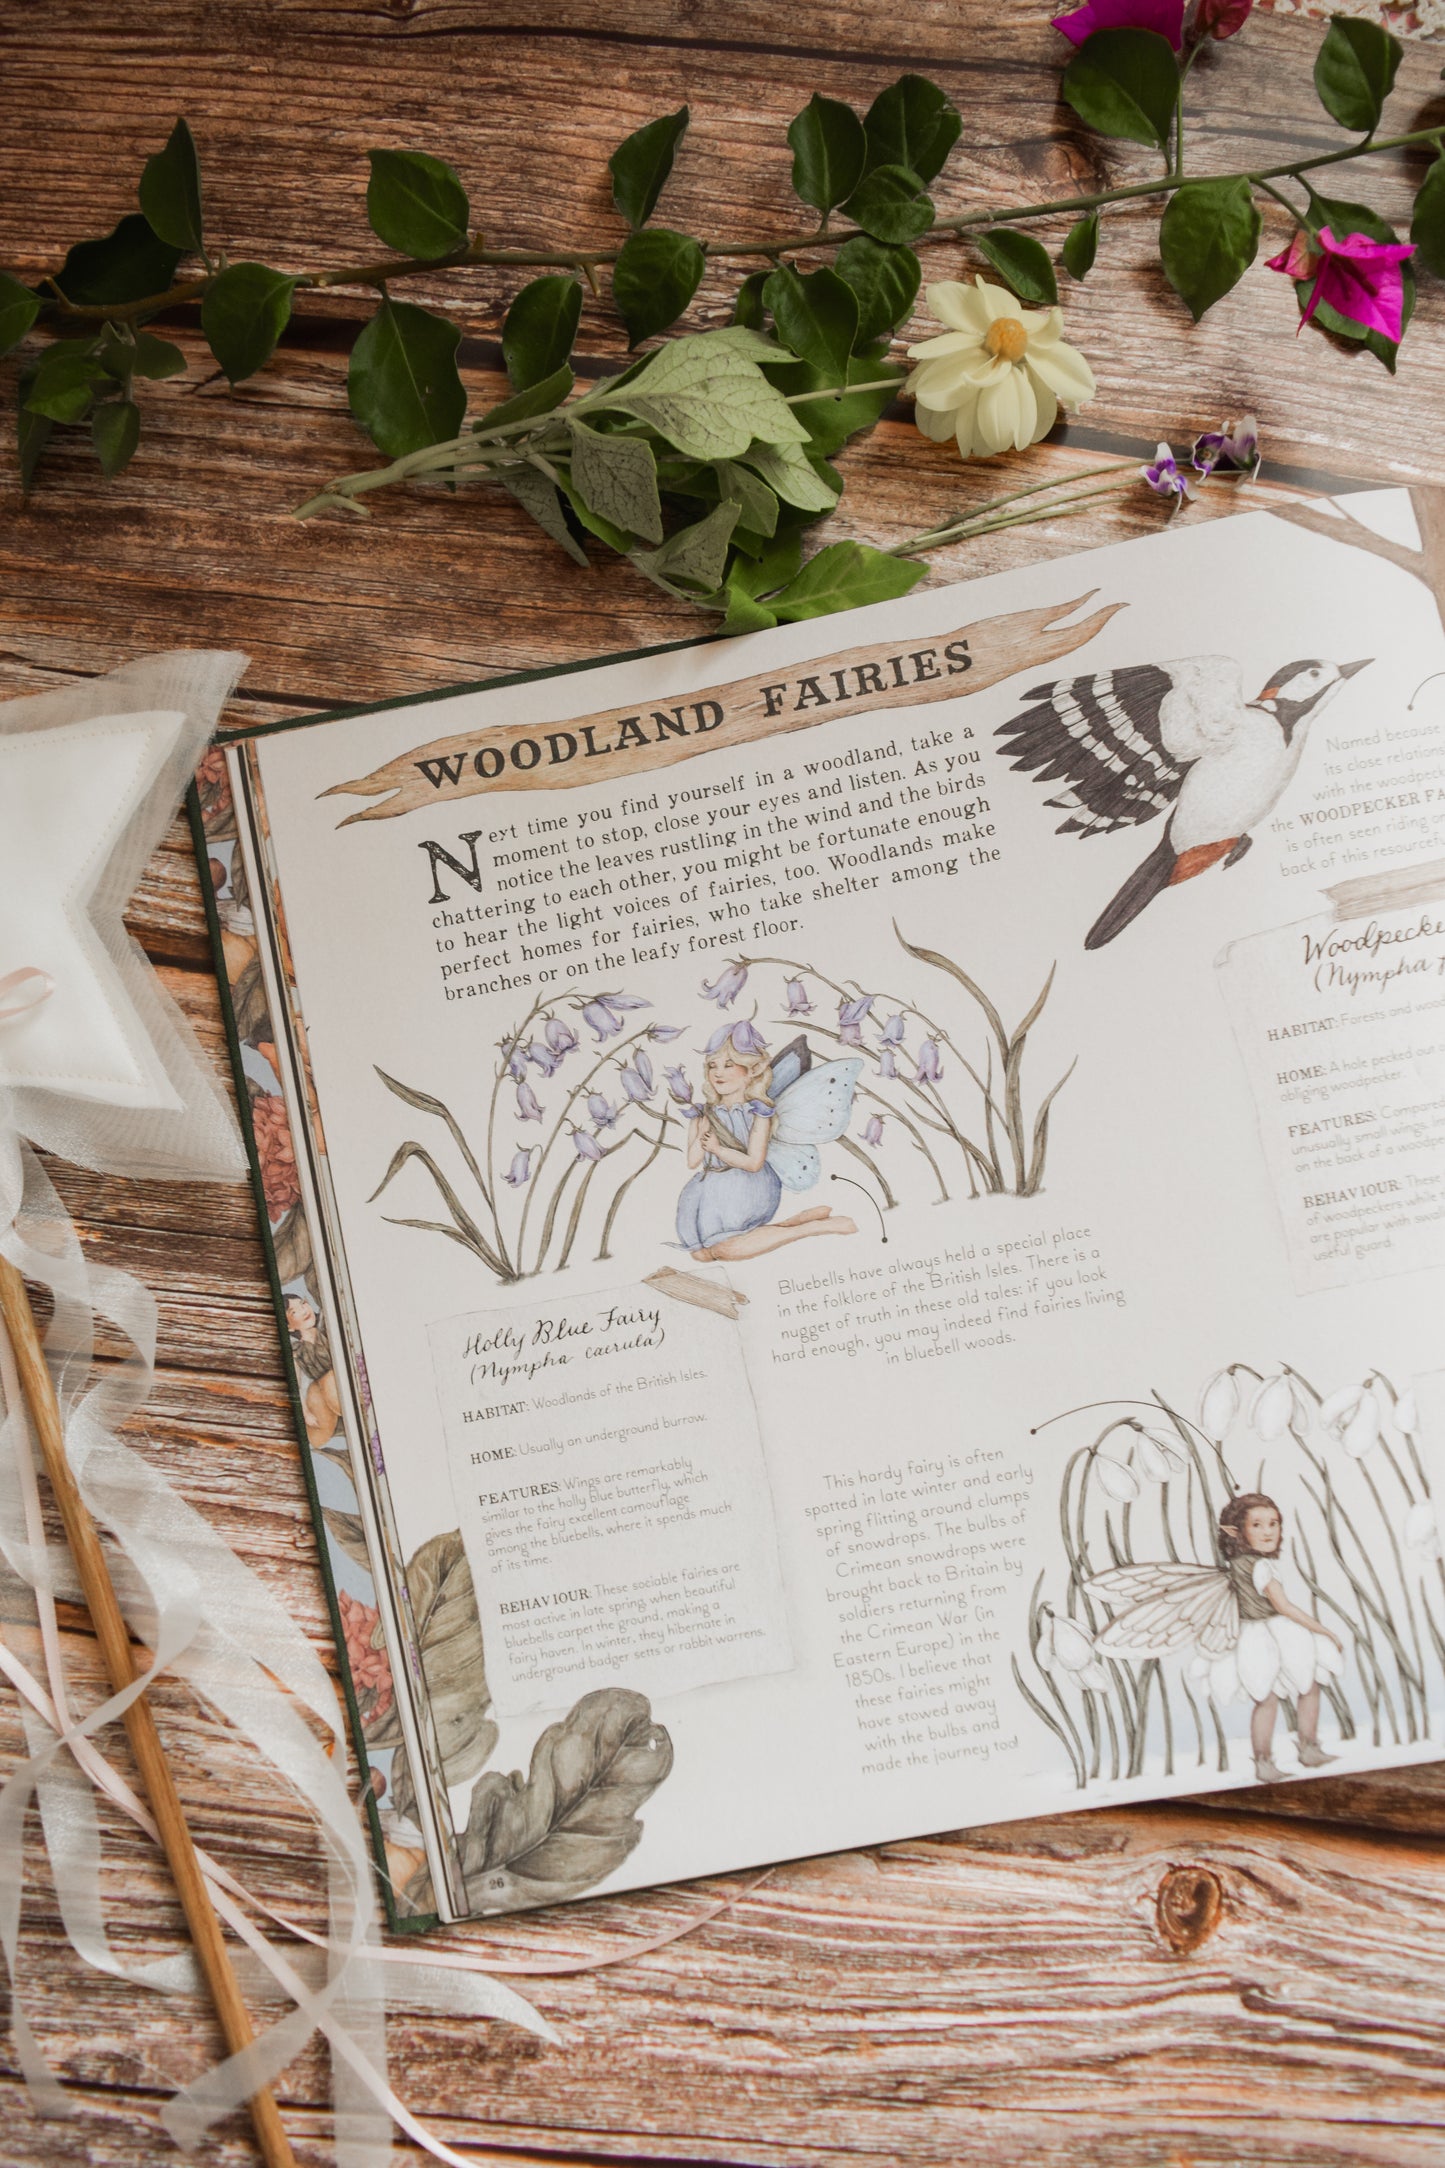 A Natural History of Fairies Heirloom Book